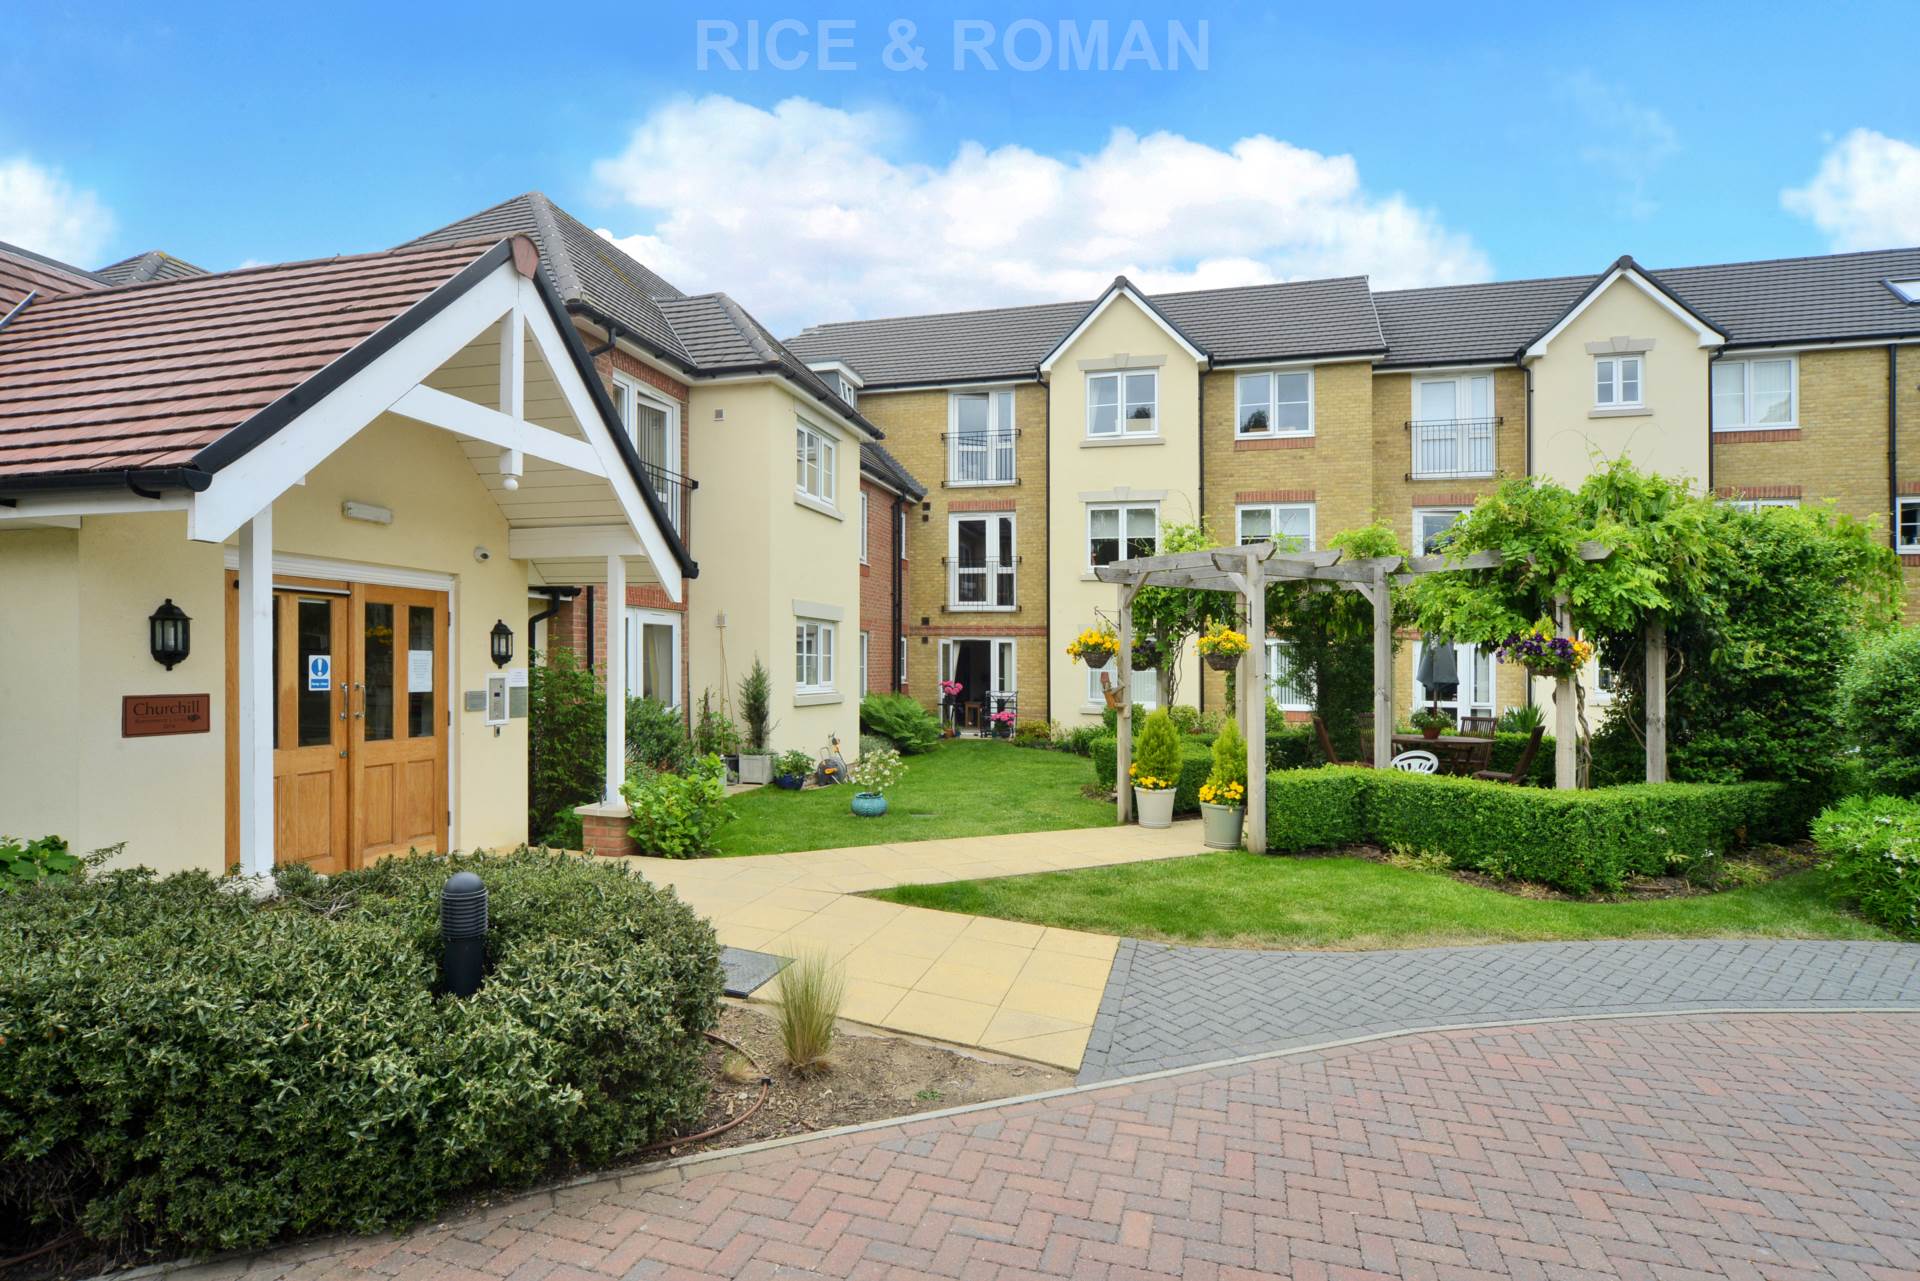 1 bed Retirement for rent in Leatherhead. From Rice & Roman